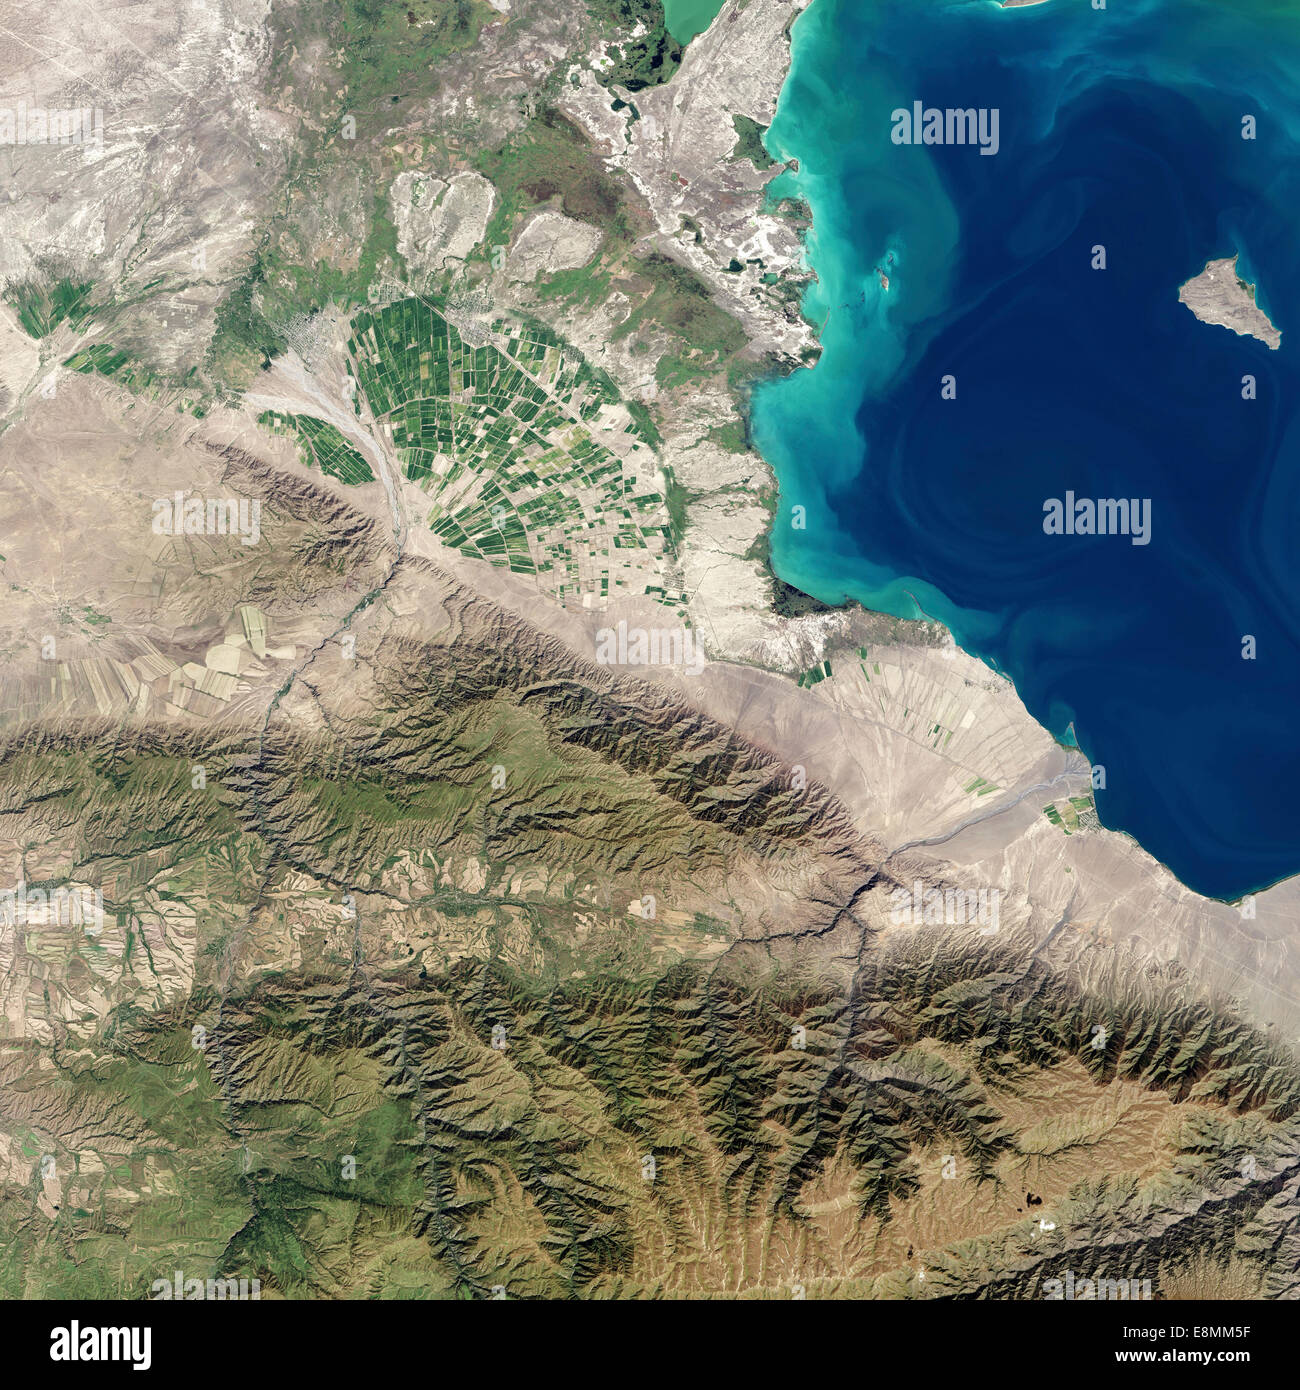 September 9, 2013 - Satellite view of an alluvial fan in Kazakhstan’s Almaty province. In the lower left of the image, the Tente Stock Photo